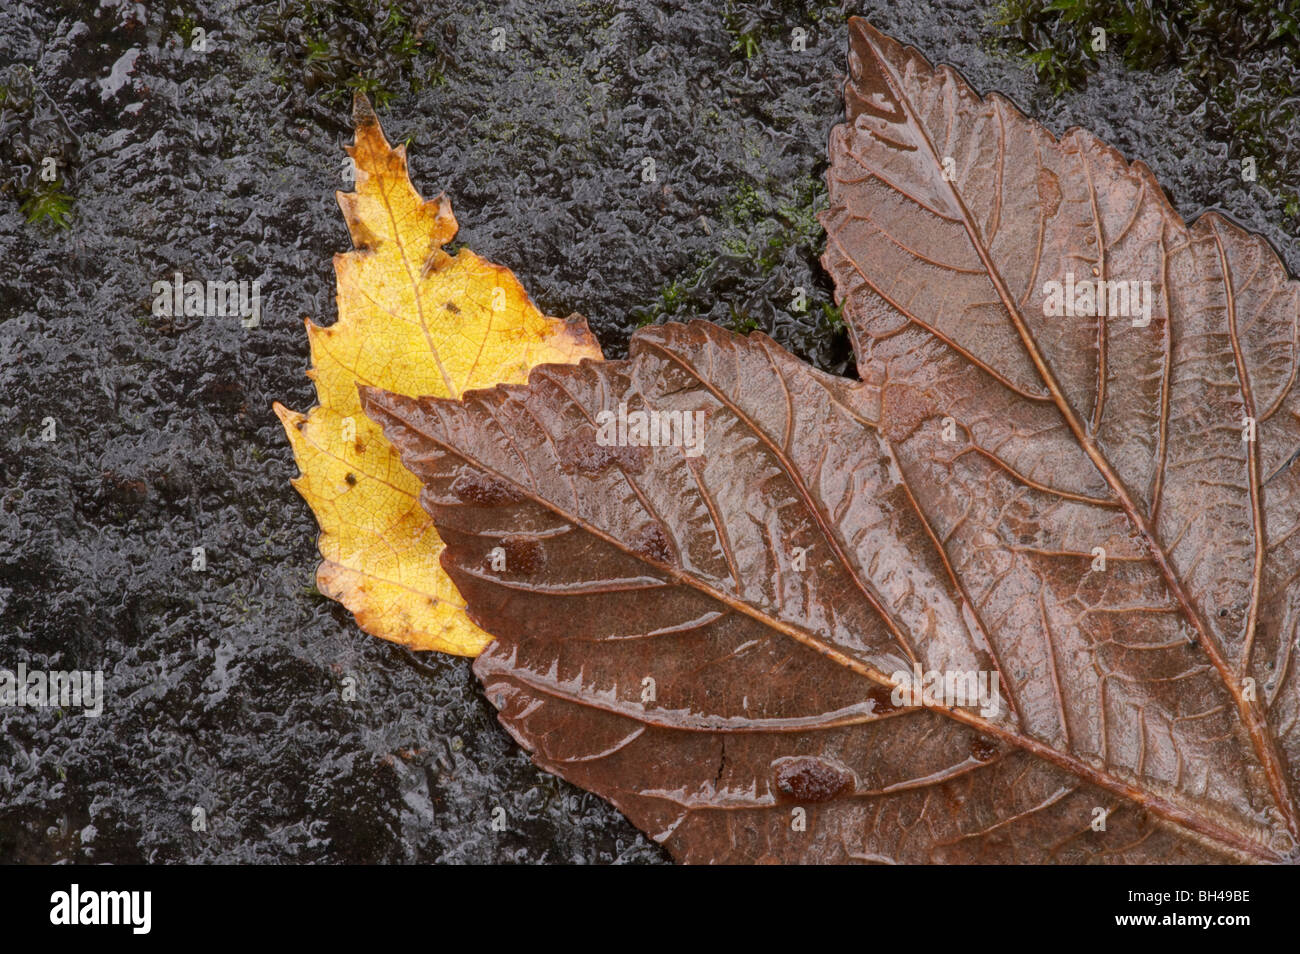 Abstract composition of wet silver birch (Betula pendula) and sycamore leaves, Lake District. Stock Photo